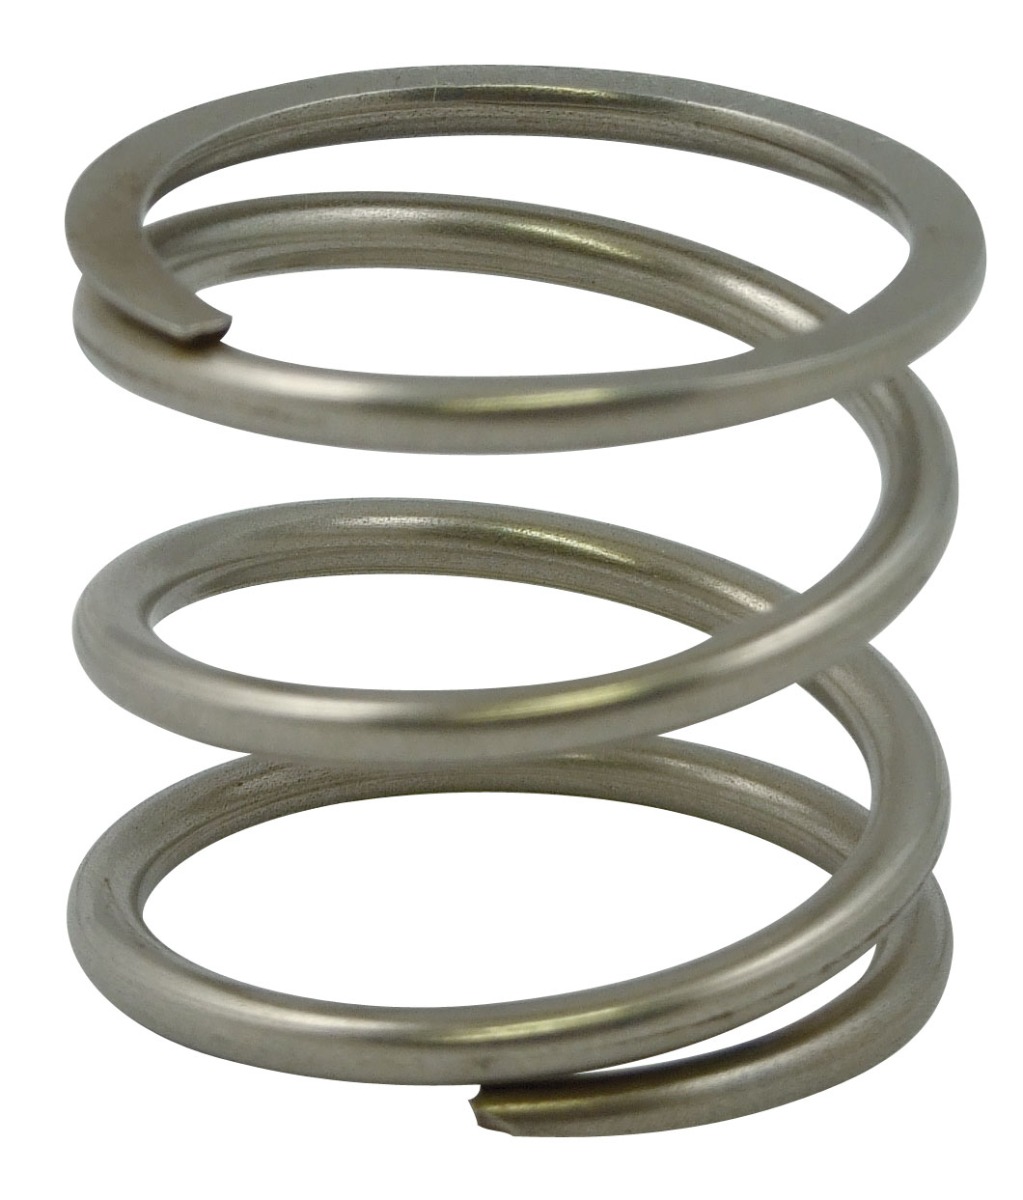 700 M.bar Spring To Suit 15mm (1/2") RK86